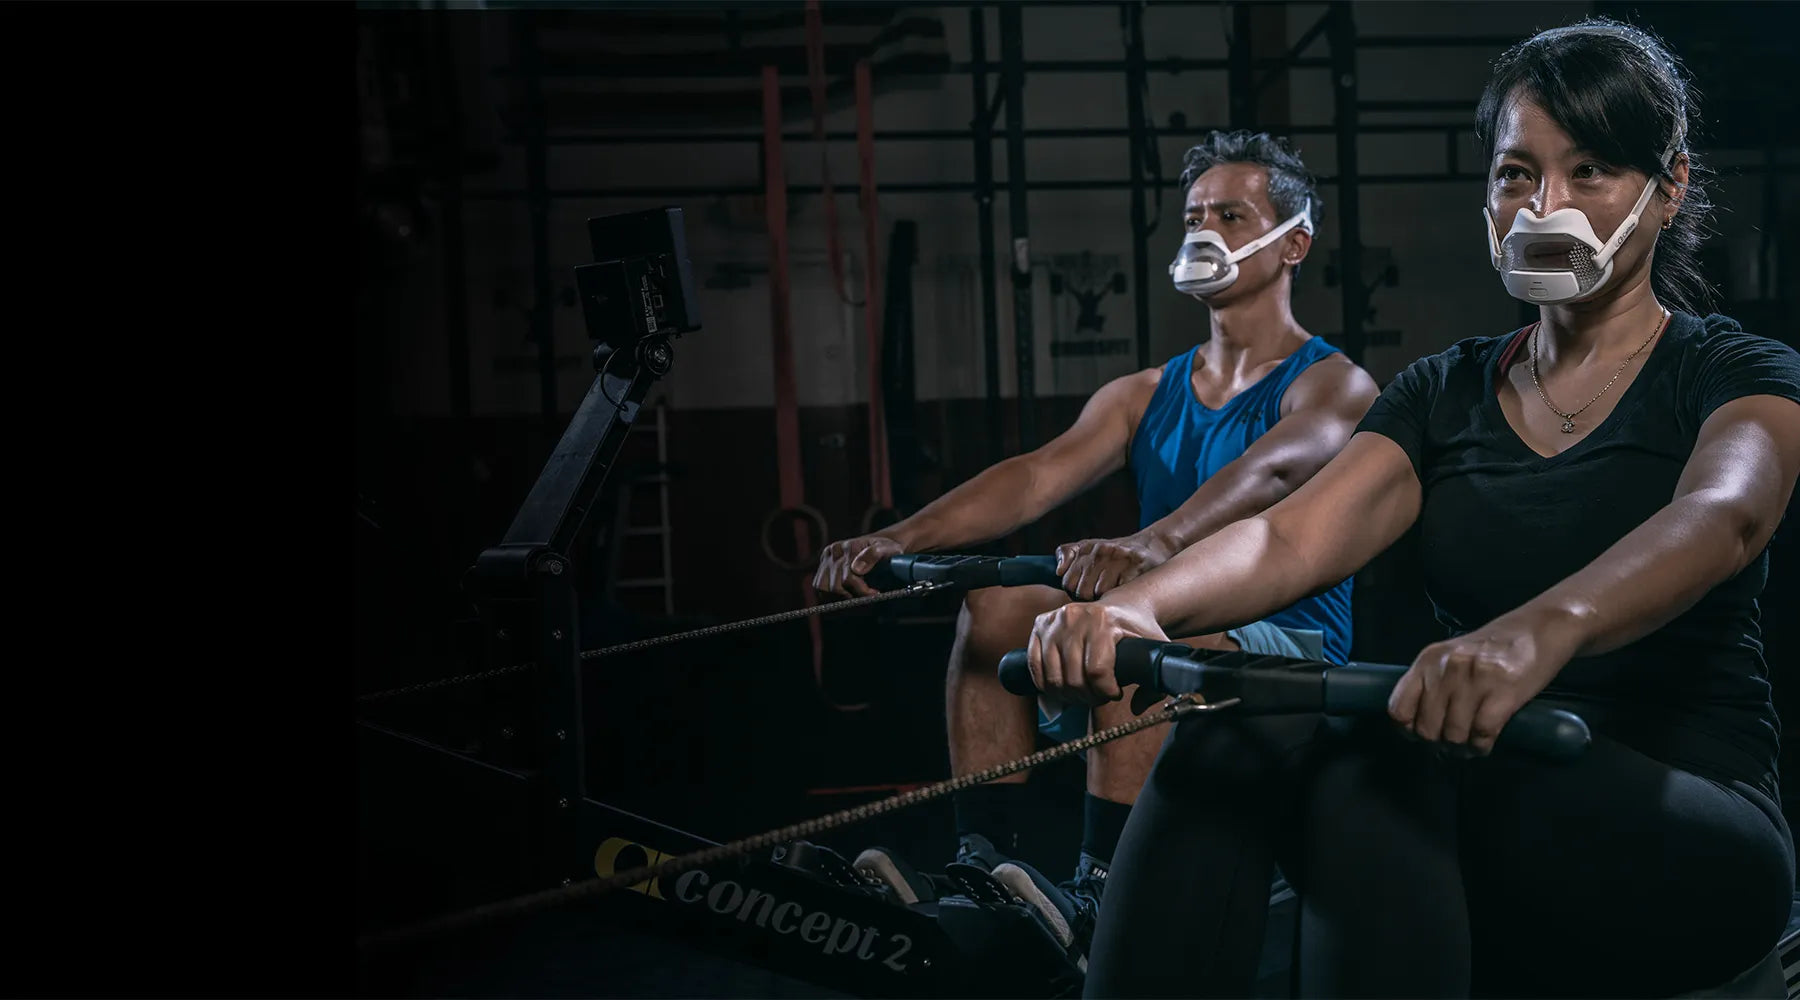 Two athletes using Calibre Breath Tracker while Rowing